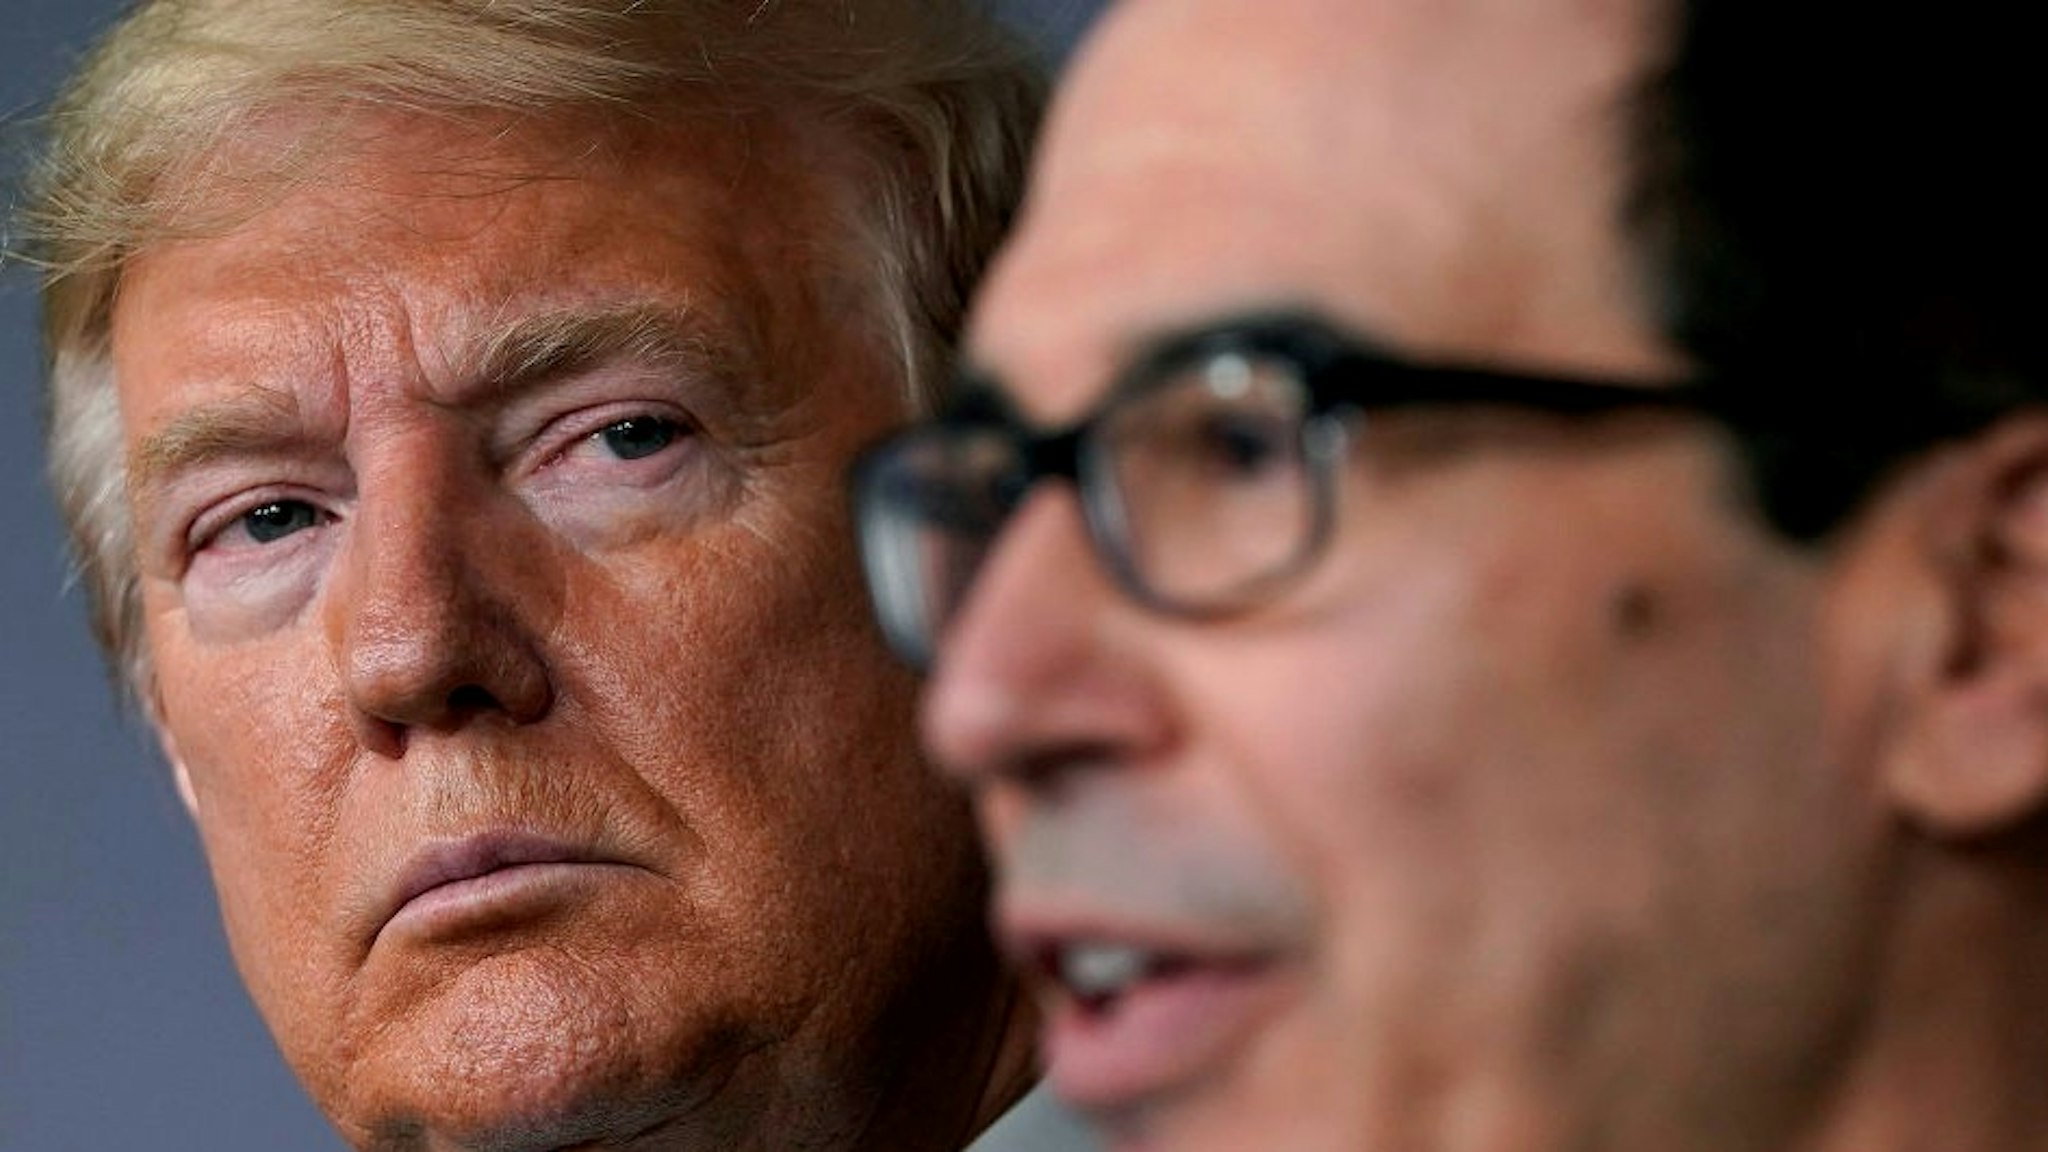 WASHINGTON, DC - MARCH 17: (L-R) U.S. President Donald Trump listens to Secretary of the Treasury Steven Mnuchin speak during a briefing about the coronavirus in the press briefing room at the White House on March 17, 2020 in Washington, DC. The Trump administration is considering an $850 billion stimulus package to counter the economic fallout as the coronavirus spreads. (Photo by